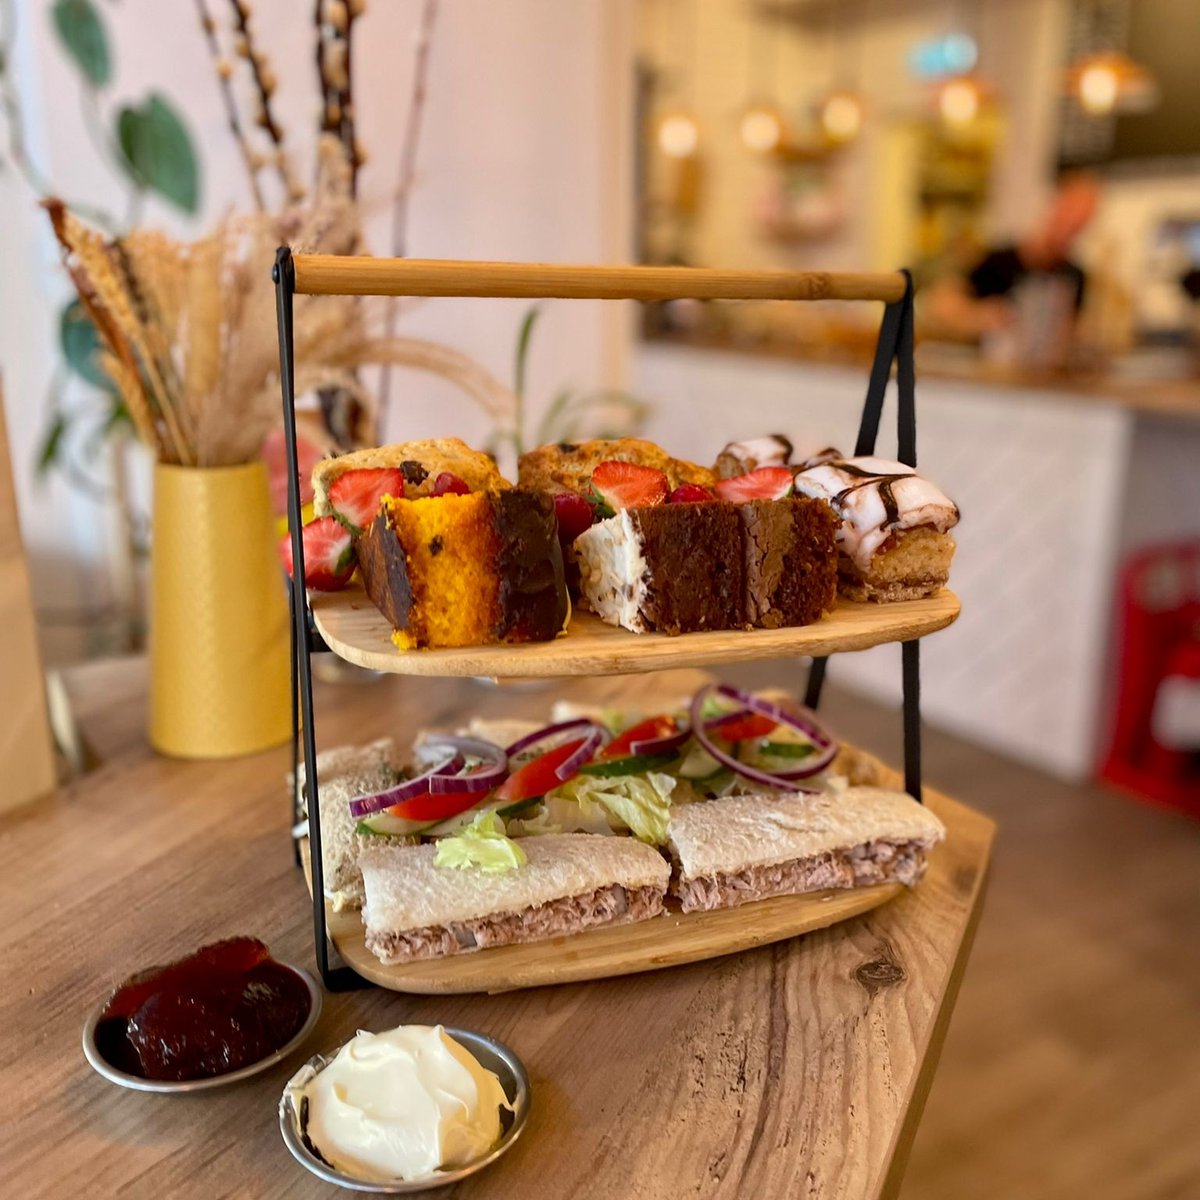 It’s #afternoonteaweek all this week, and you can book afternoon tea for two for £15 per person or £21 per person with a mini bottle of fizz each.

Consists of selection of sandwiches, scones, clotted cream & jam, and selection of cakes.

We require at least 24 hours' notice.